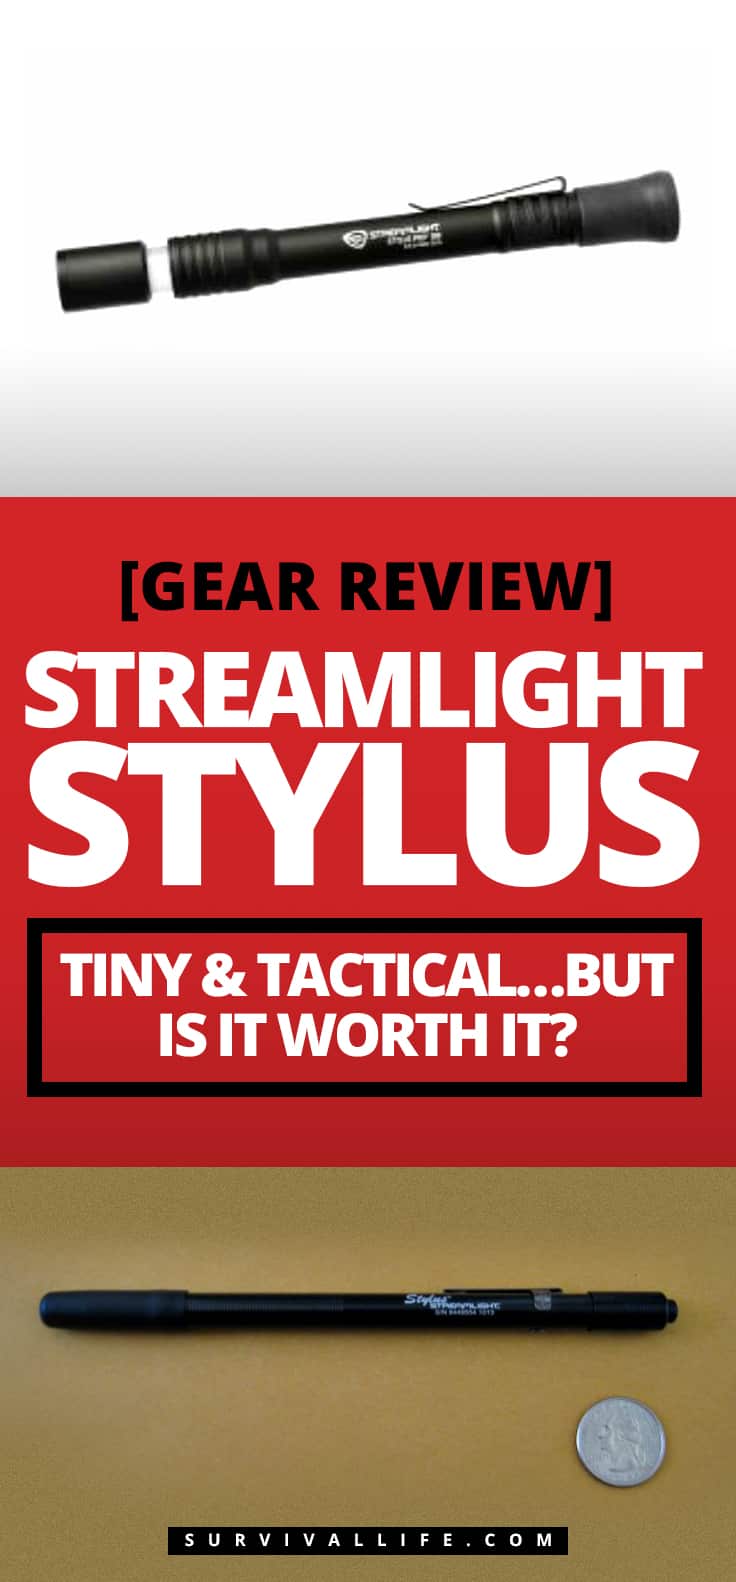 [Gear Review] Streamlight Stylus | Tiny & Tactical…But is it worth it?